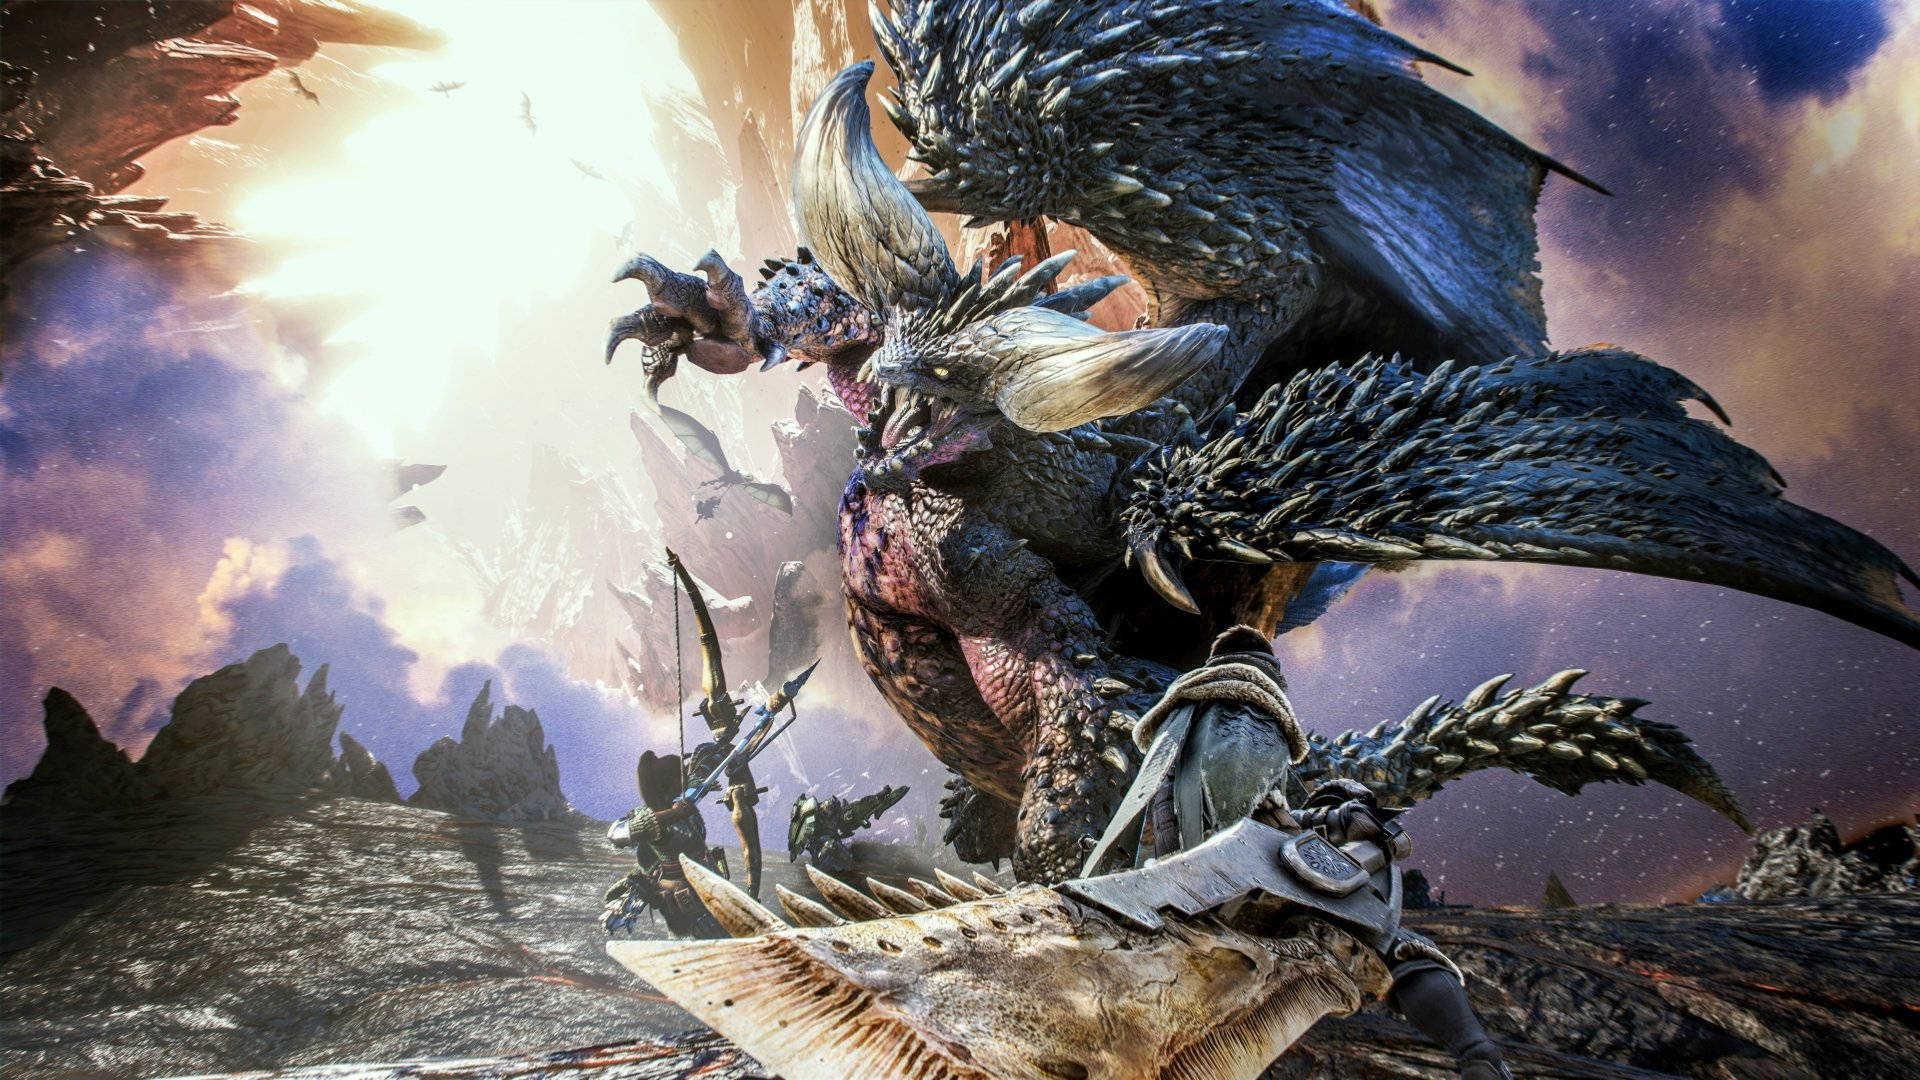 "Ready to take on all the creatures of Monster Hunter: World Iceborne!" Wallpaper